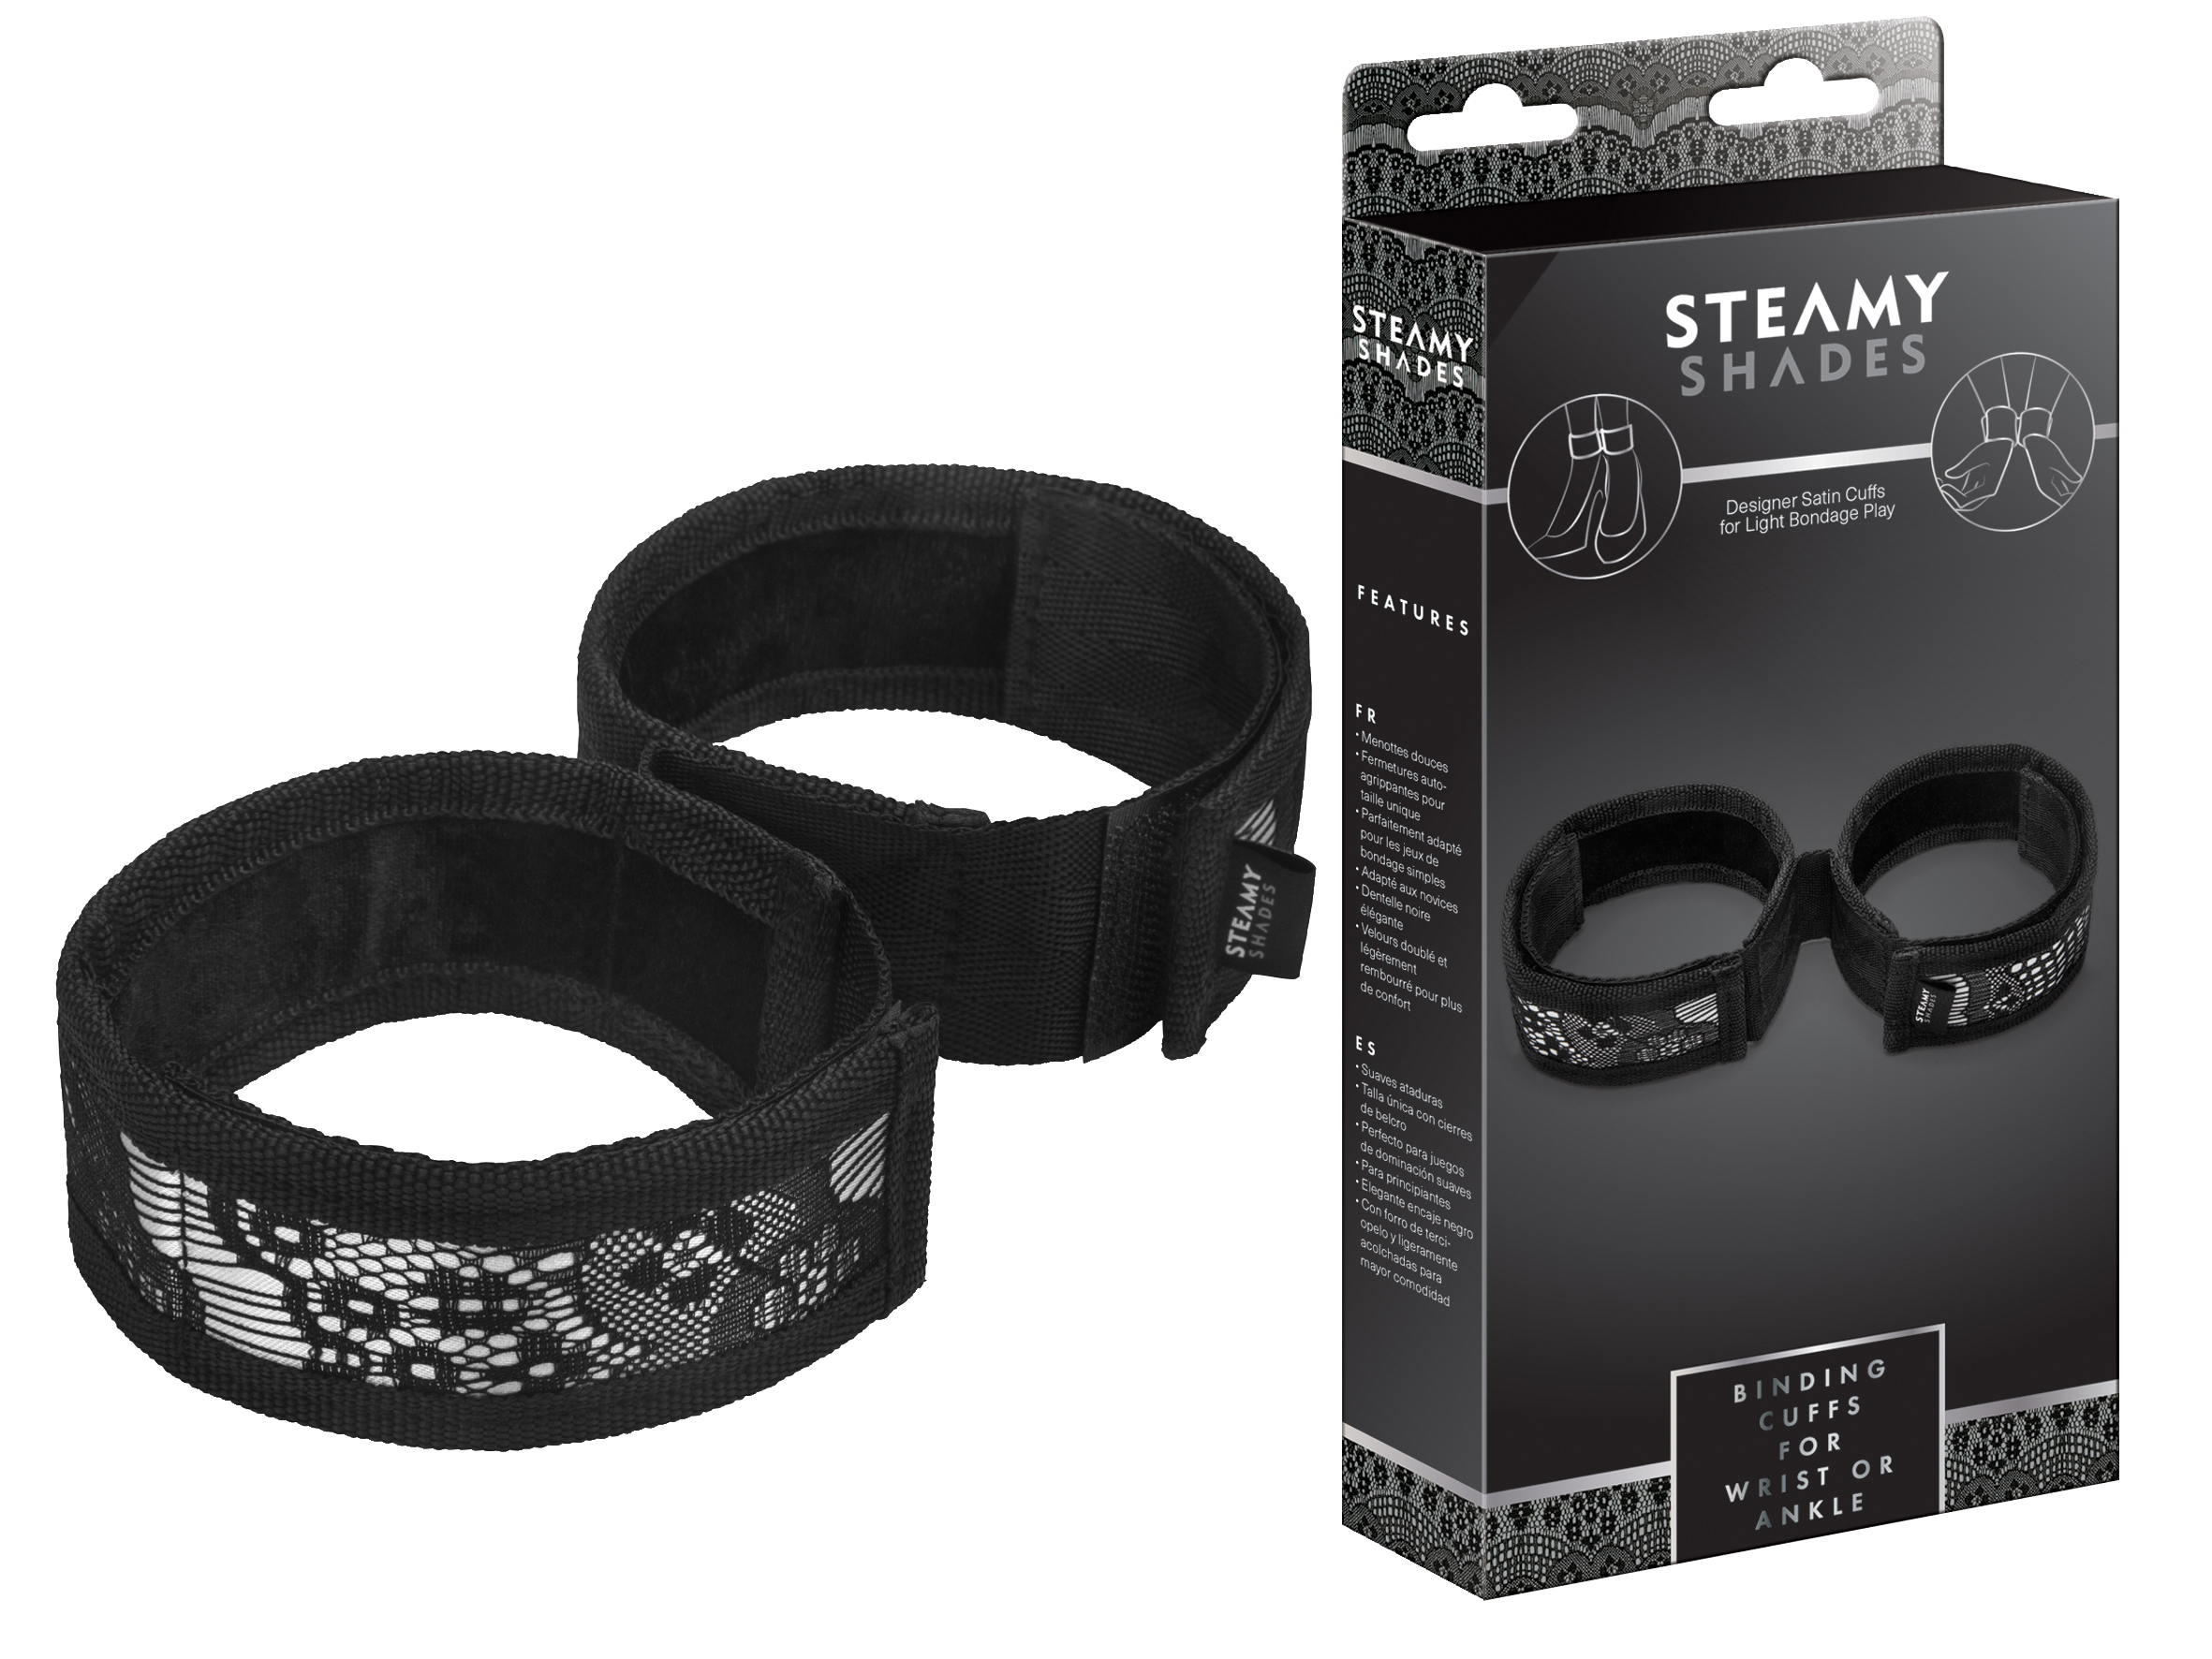 STEAMY SHADES Binding Cuffs for Wrist or Ankle